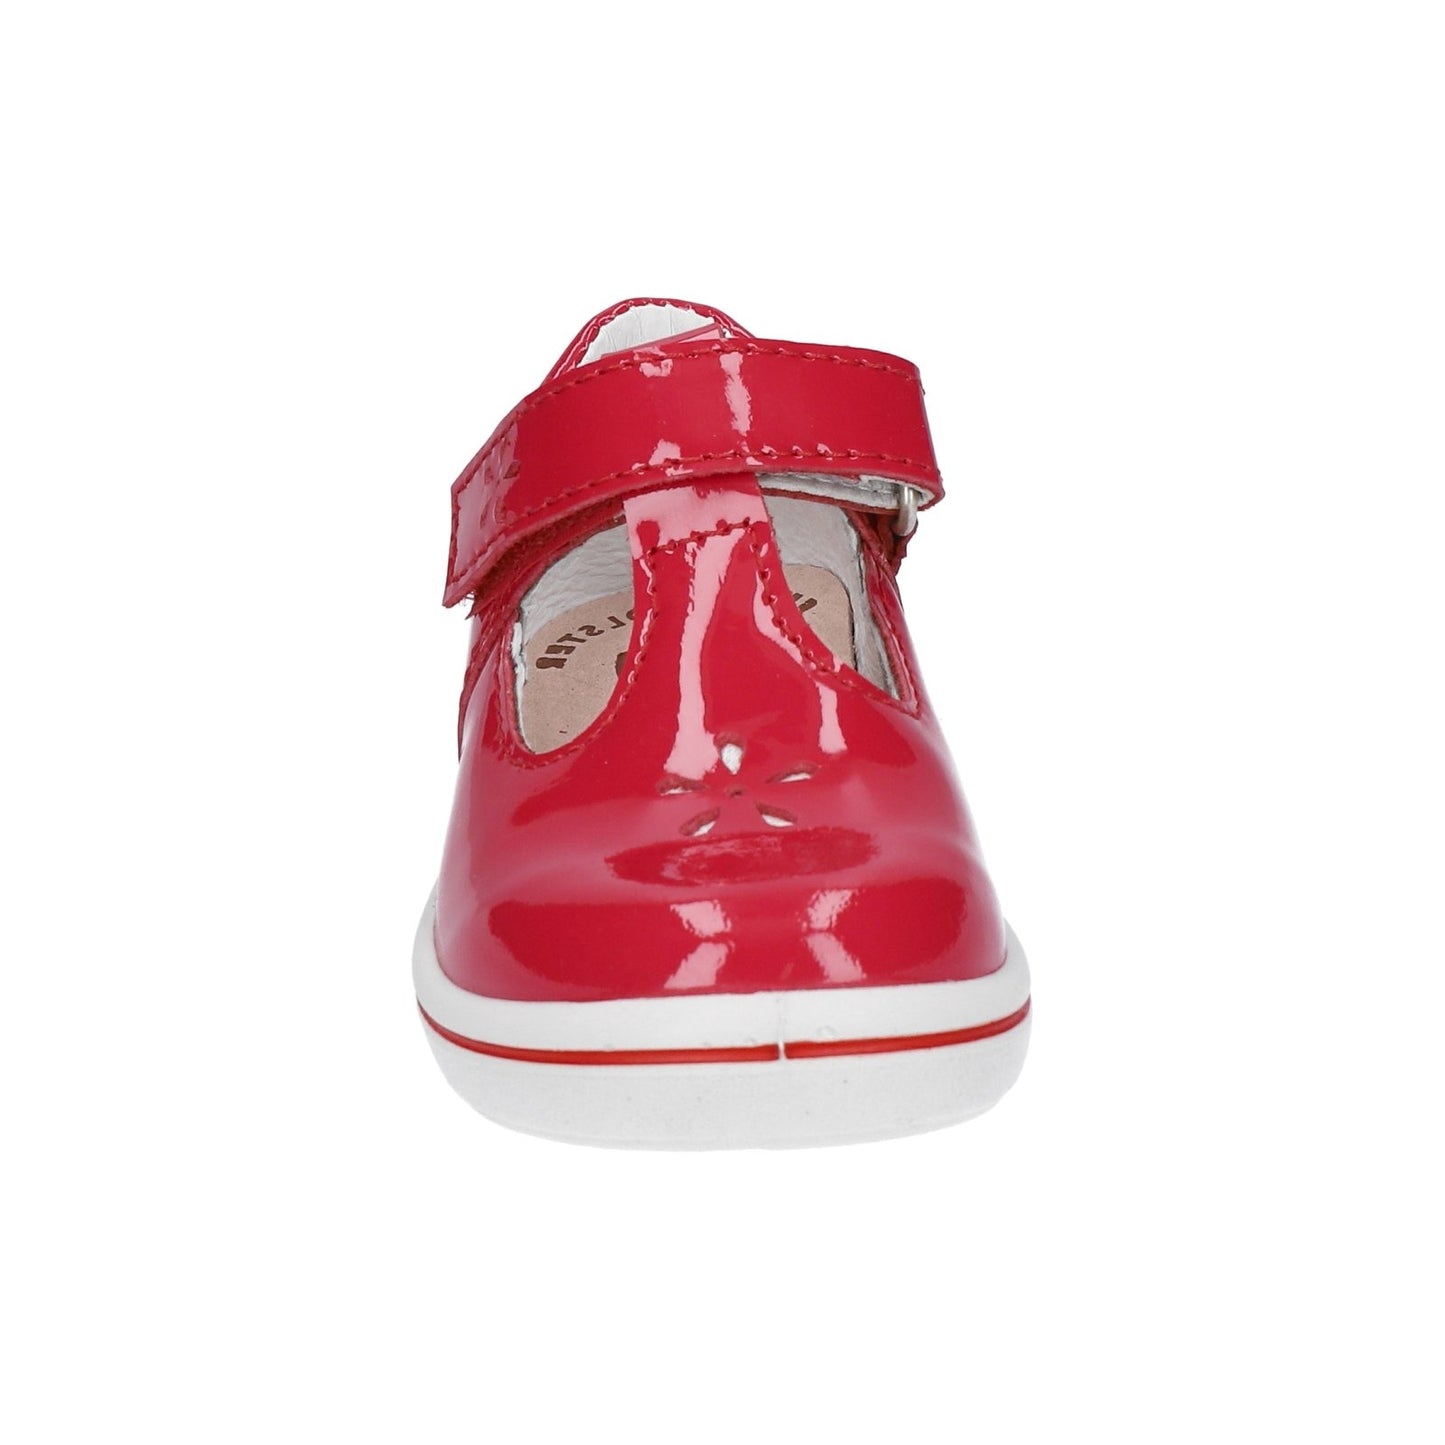 Winona Girl's T-Bar Shoe in Cherry Red Patent